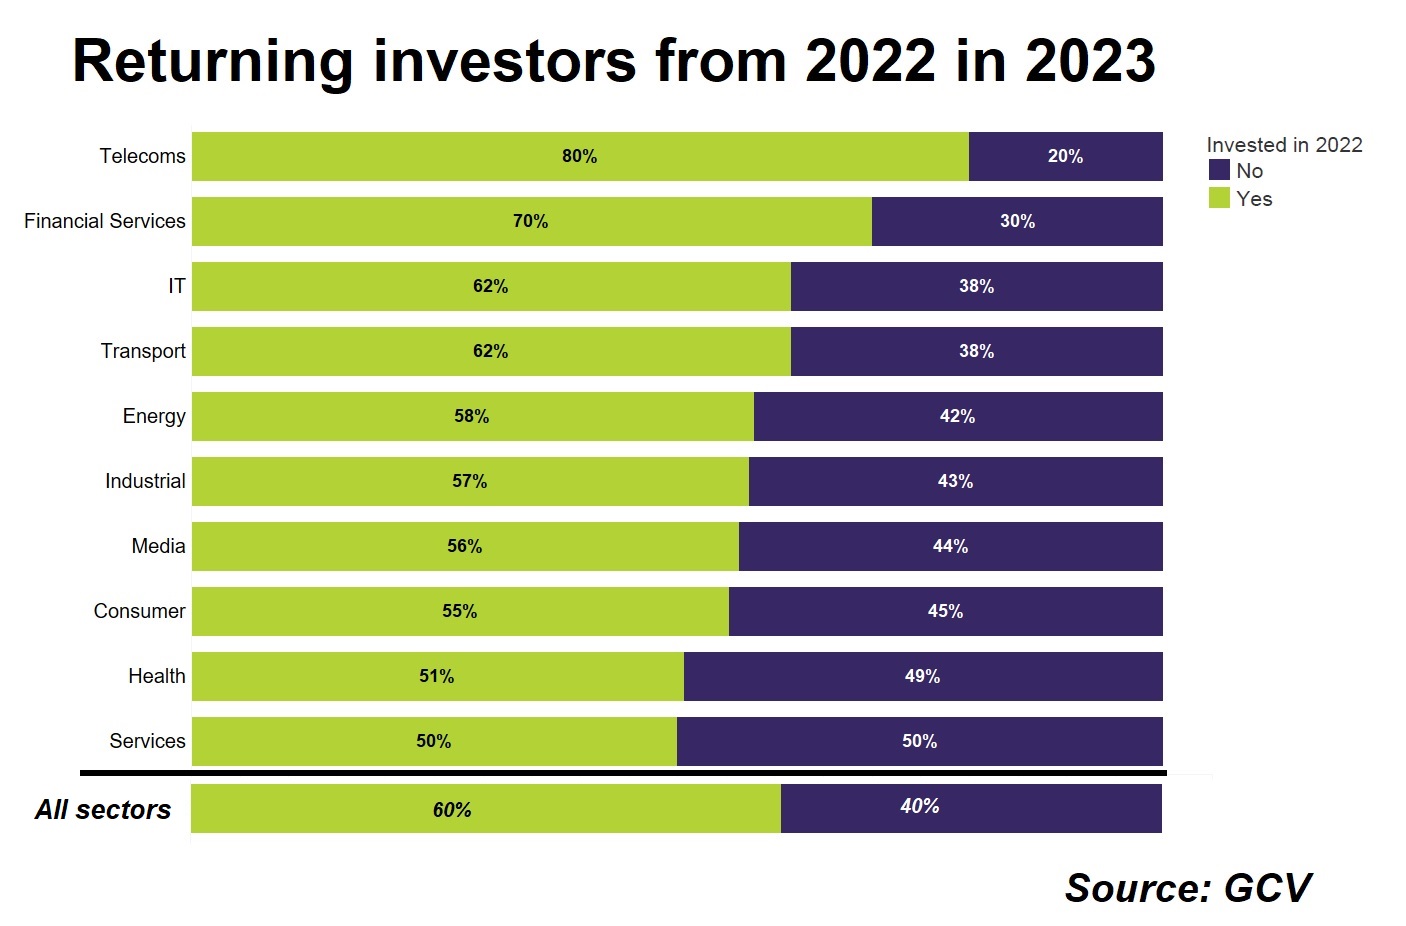 Horizontal bar chart showing returning investors from 2022 in 2023 in % by sector and overall. Source: GCV